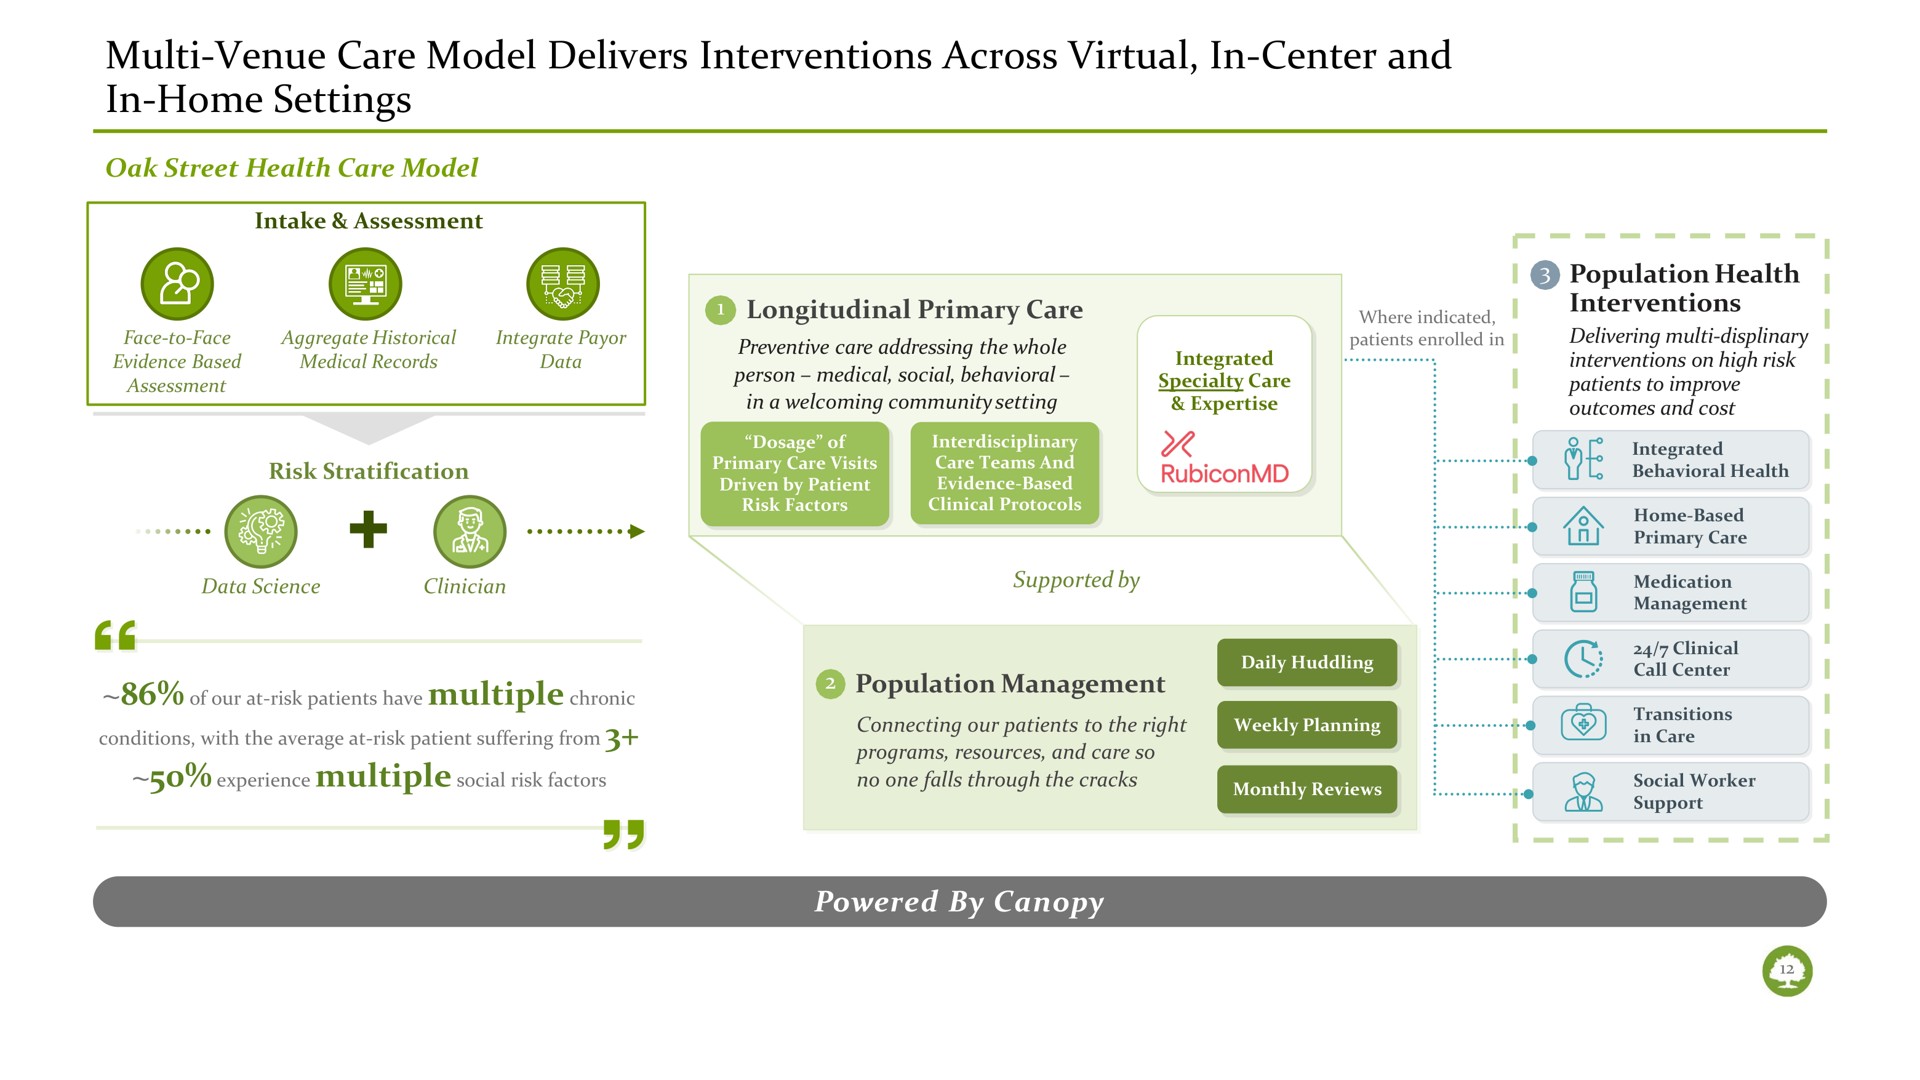 venue care model delivers interventions across virtual in center and in home settings | Oak Street Health